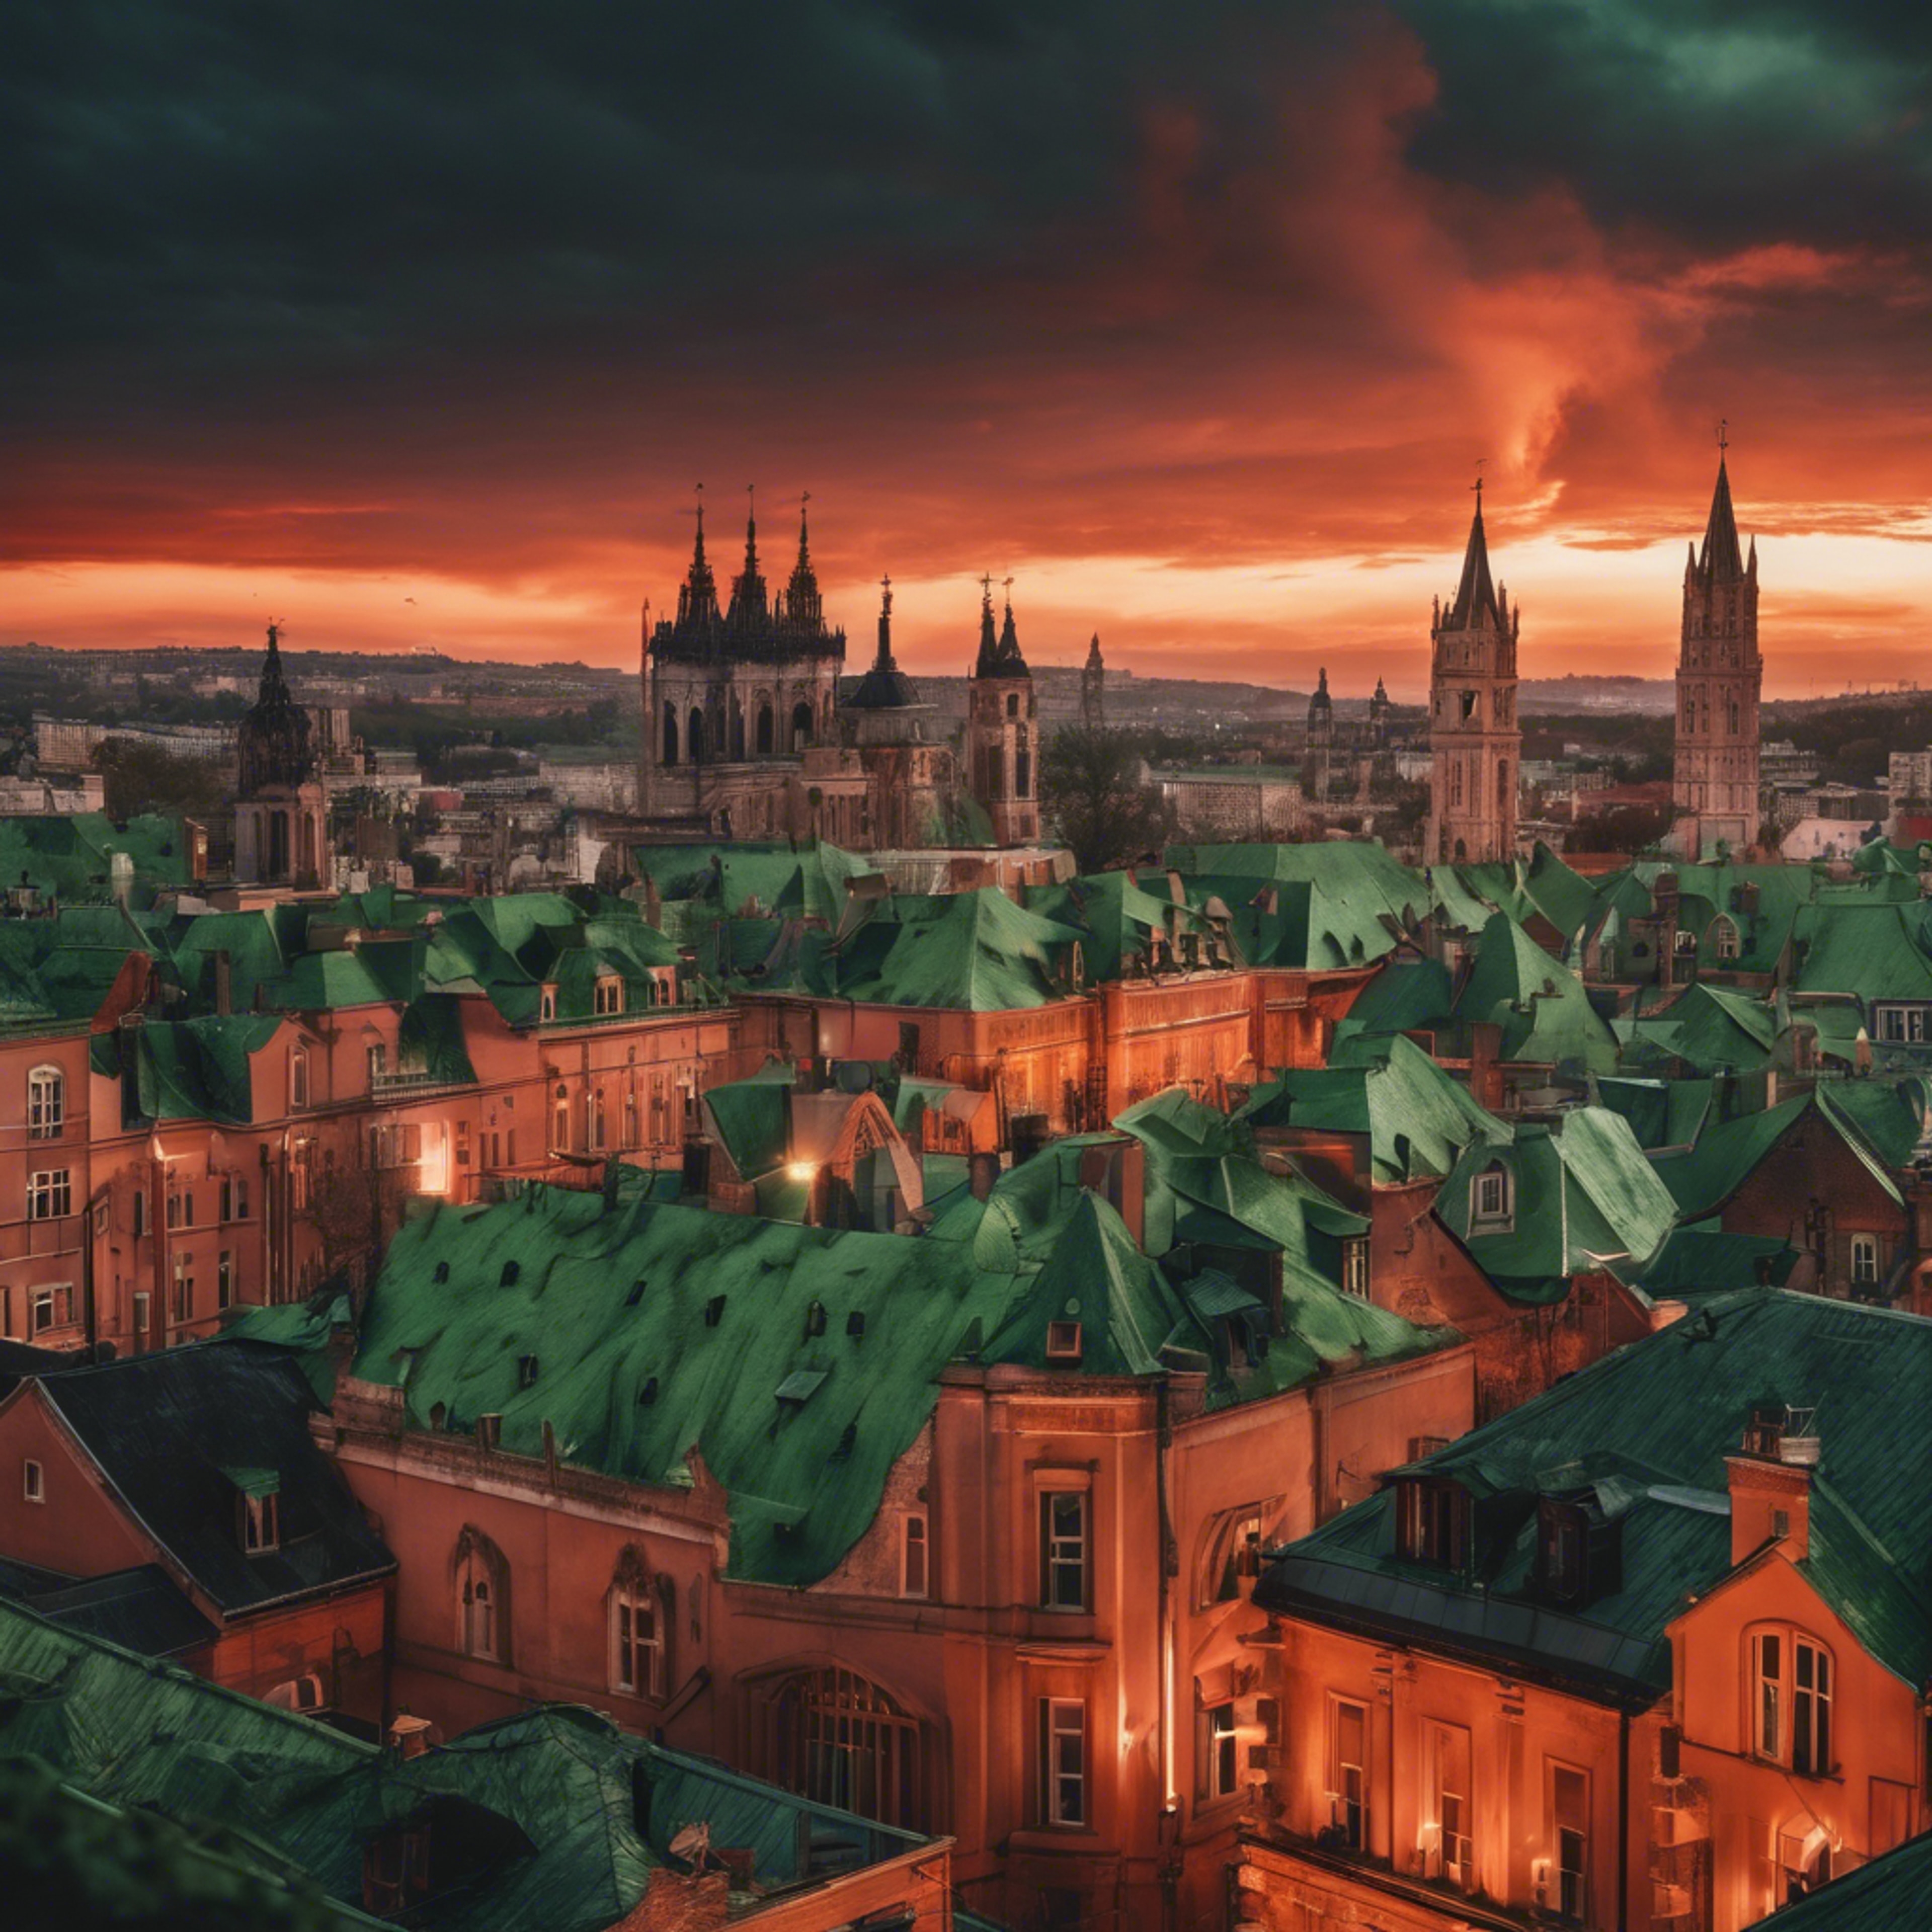 A sweeping view of a gothic city with green copper rooftops lit up by a fiery red sunset. Wallpaper[da2bf7a8af6f4cce8a61]